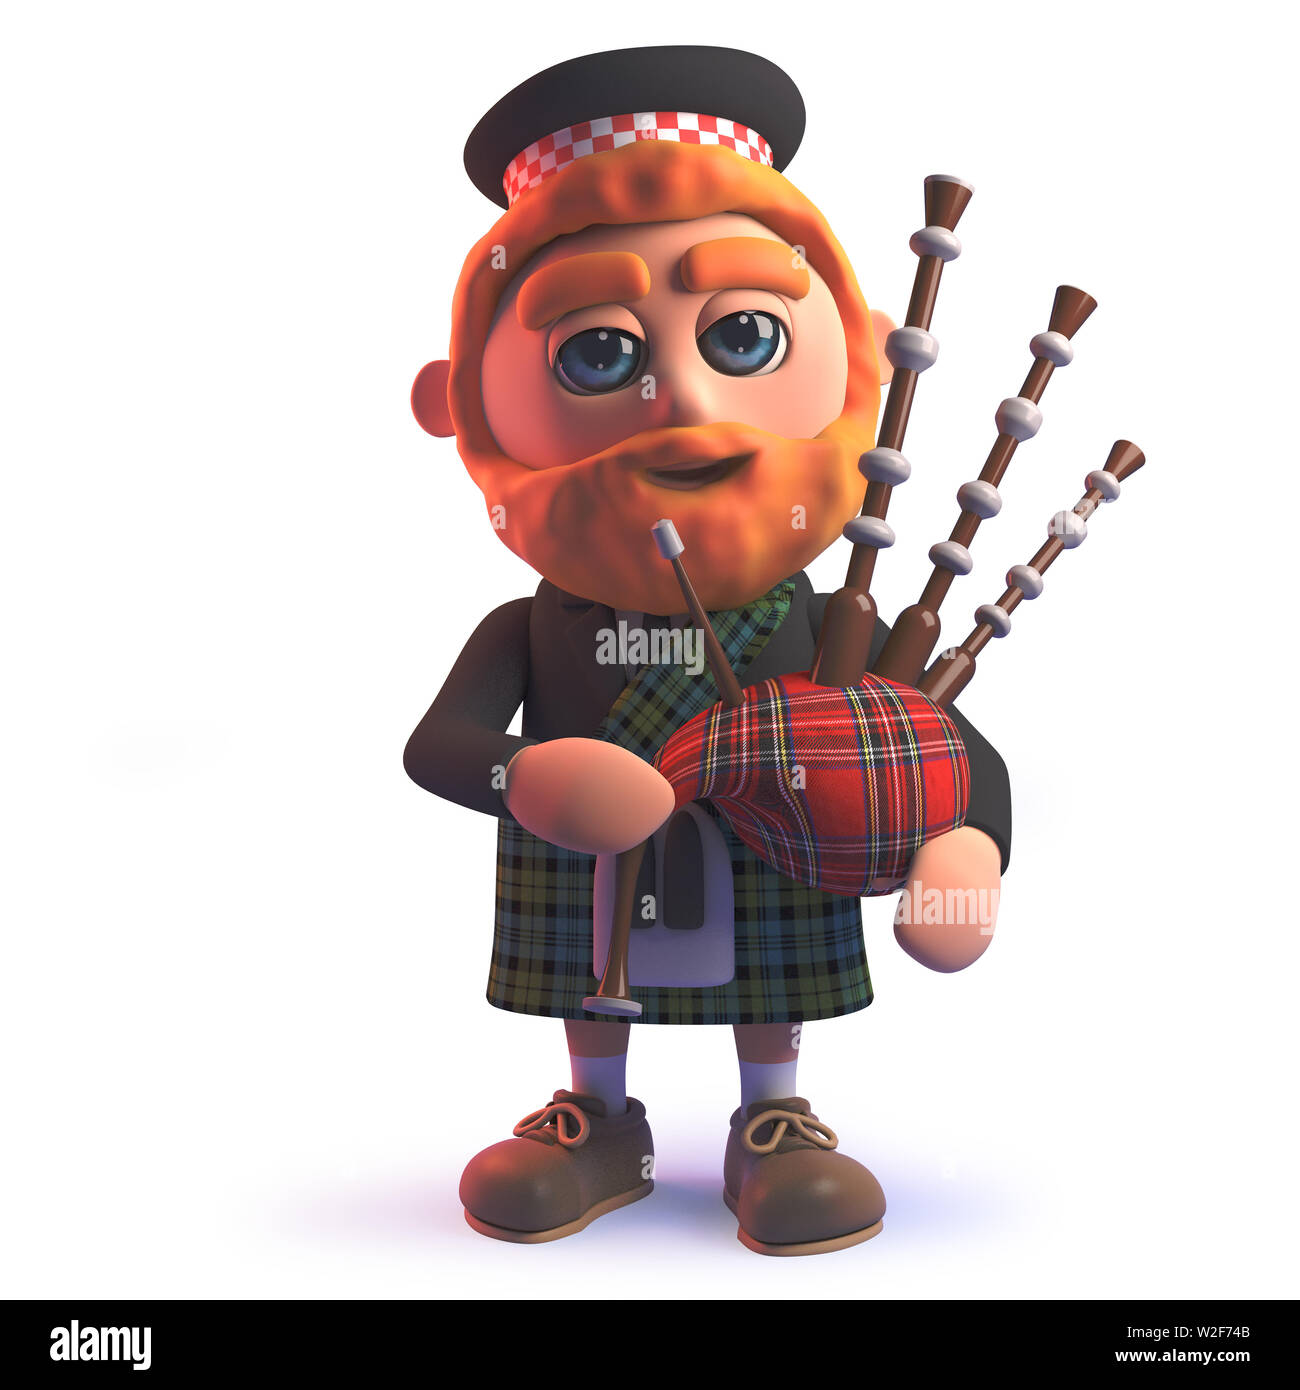 Rendered image of a cartoon 3d Scots man in kilt playing the Scottish bagpipes Stock Photo